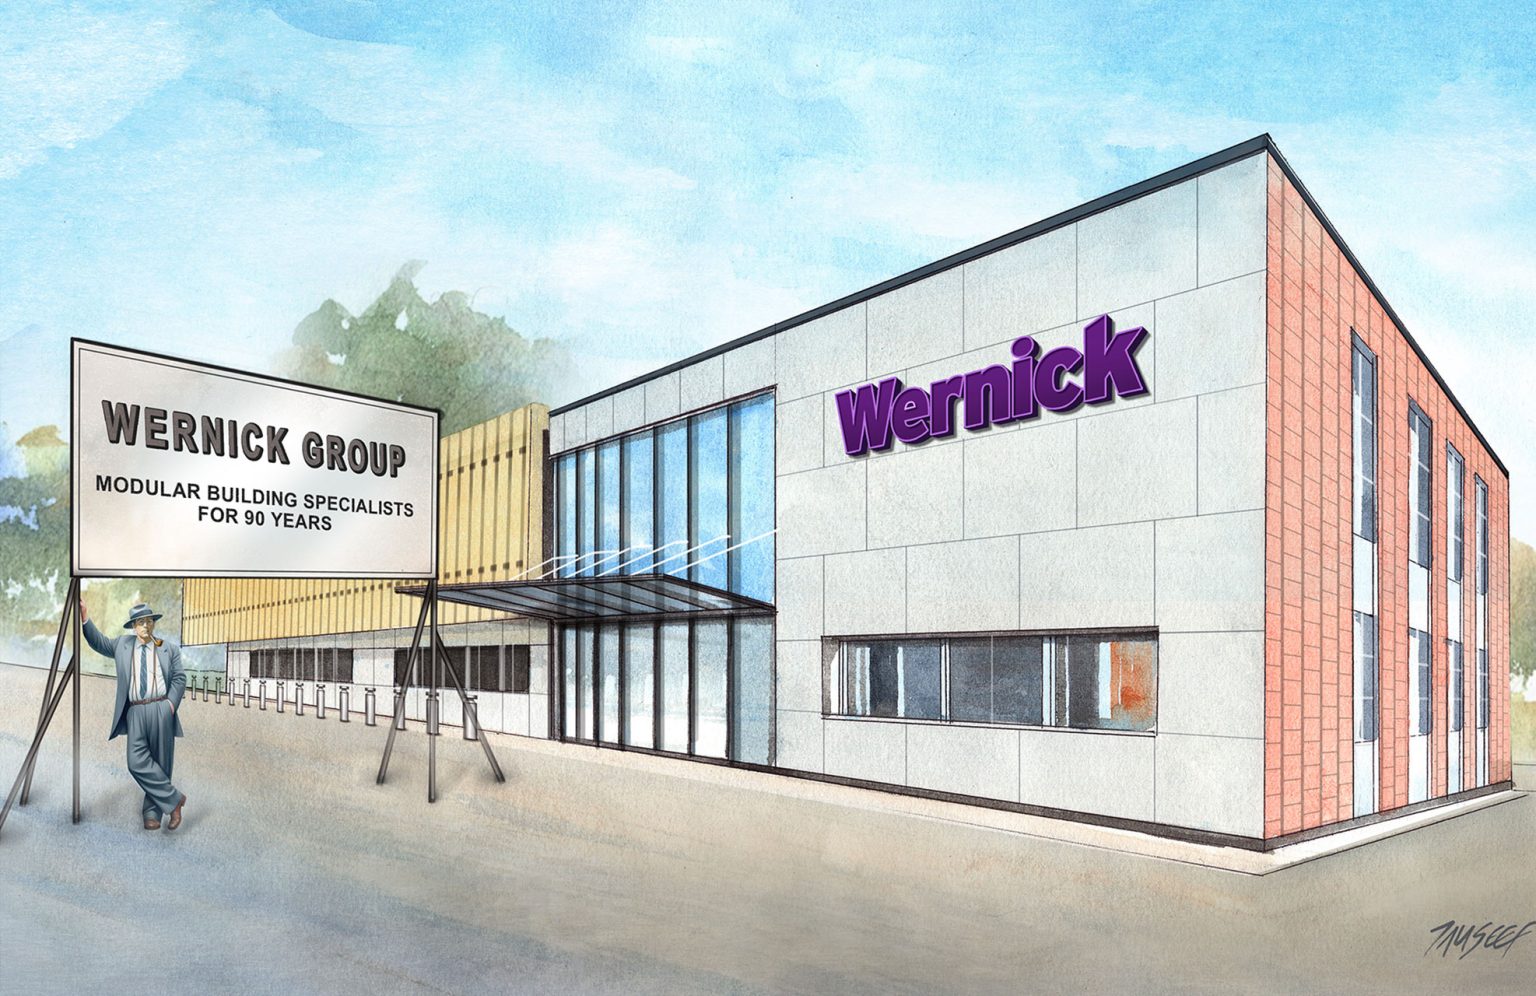 Wernick Group celebrates 90 years of business